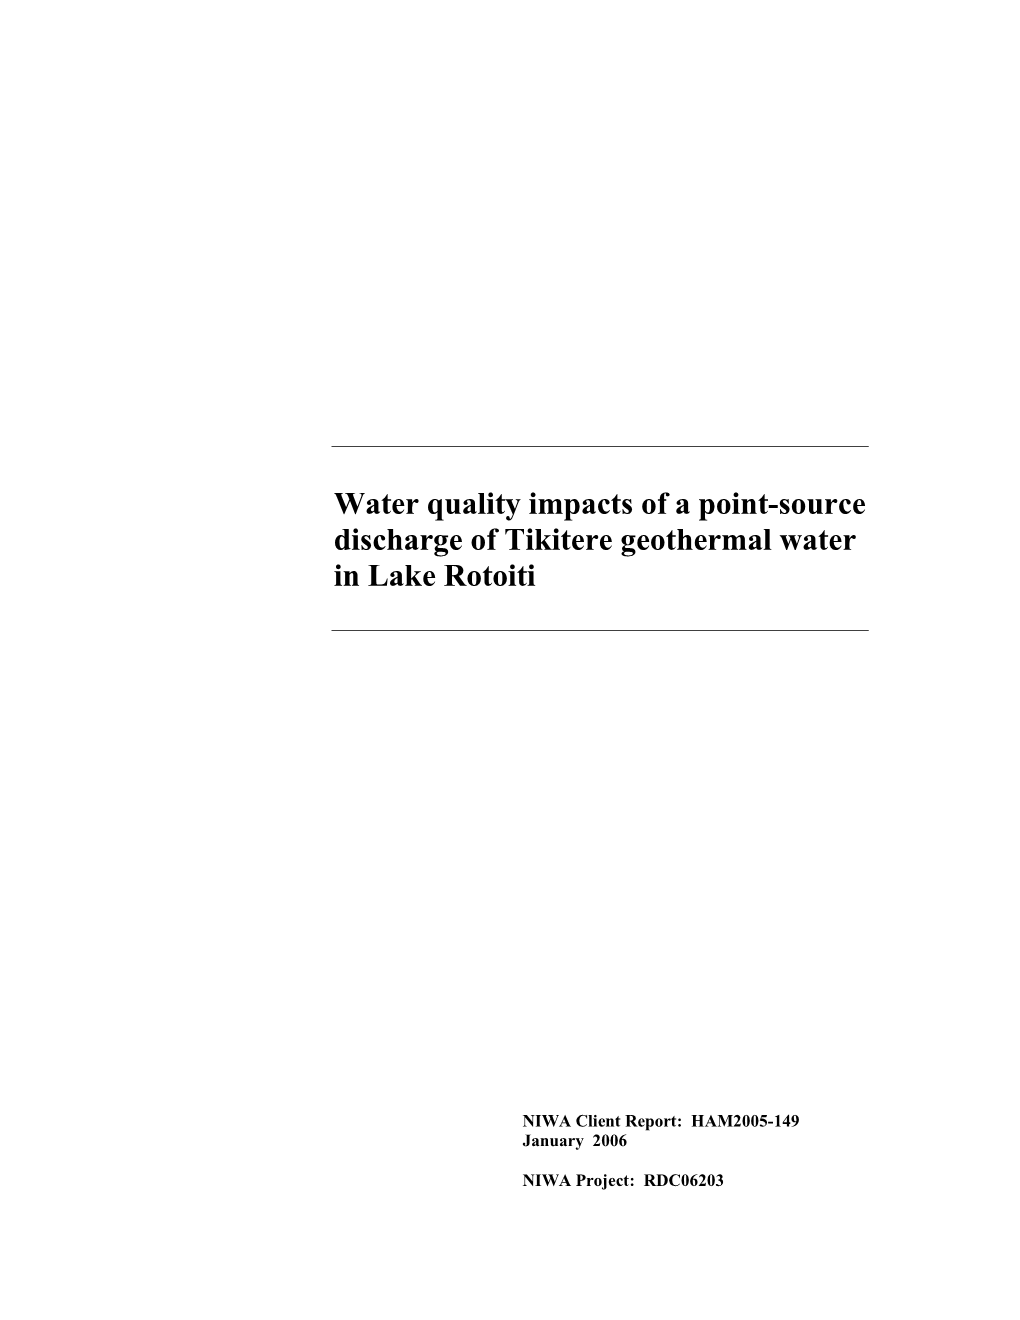 Water Quality Impacts of a Point-Source Discharge of Tikitere Geothermal Water in Lake Rotoiti